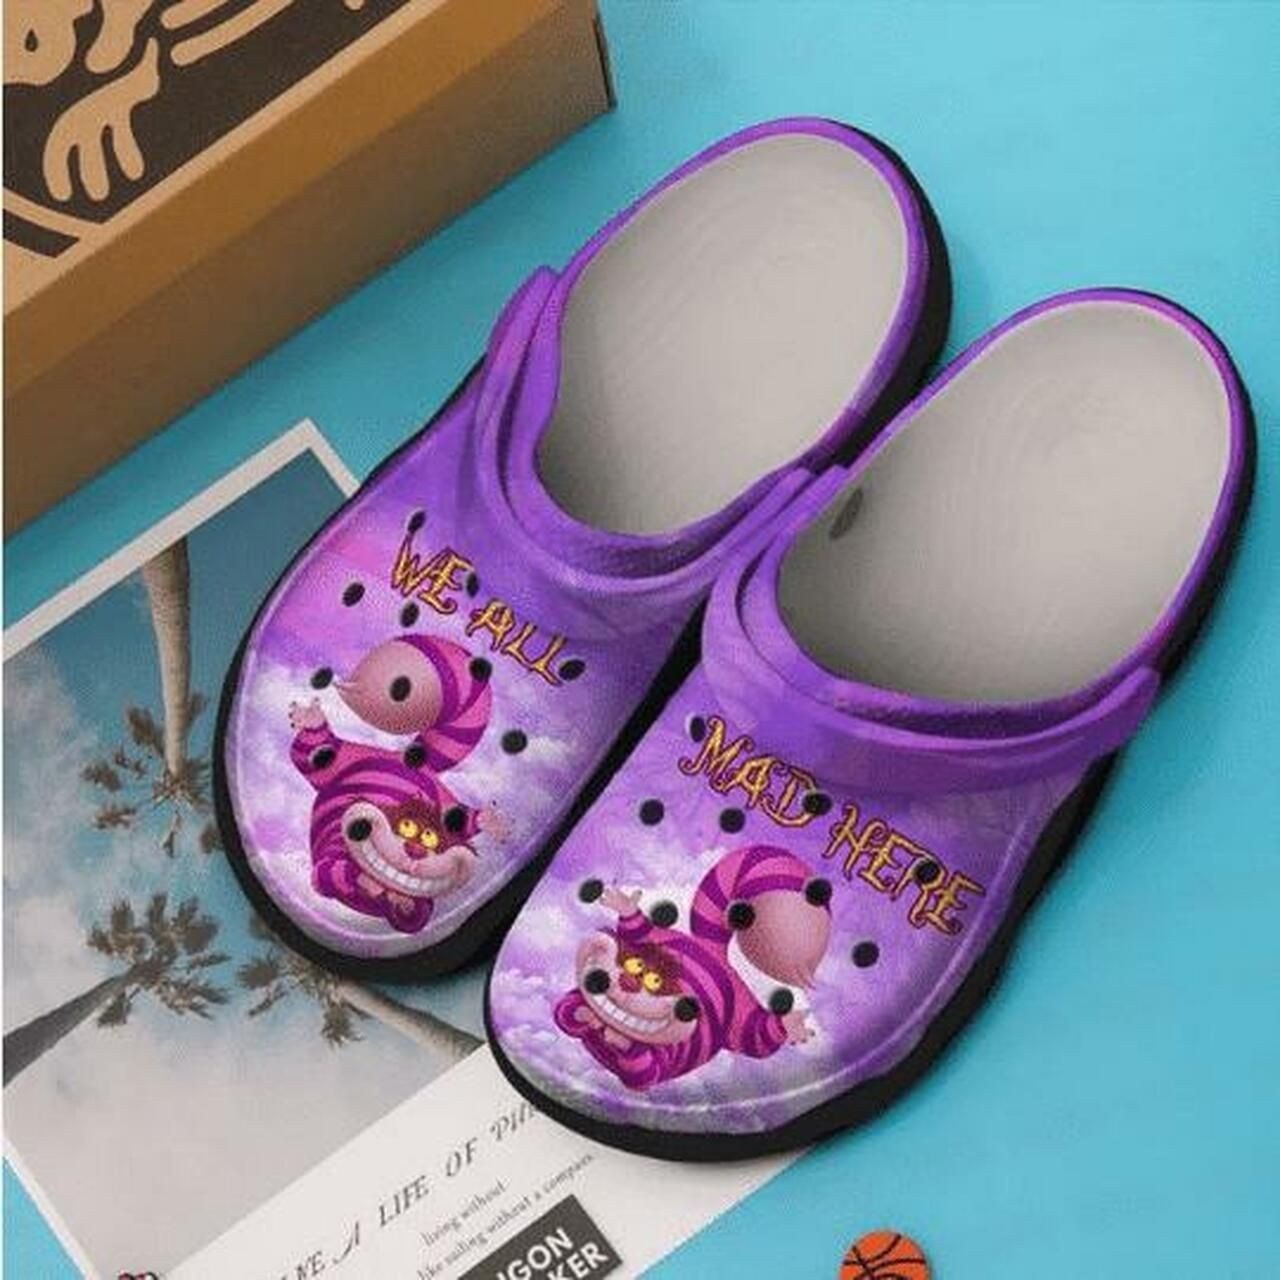 We’Re All Mad Alice In Wonderland Crocs Crocband Clog Comfortable Water Shoes